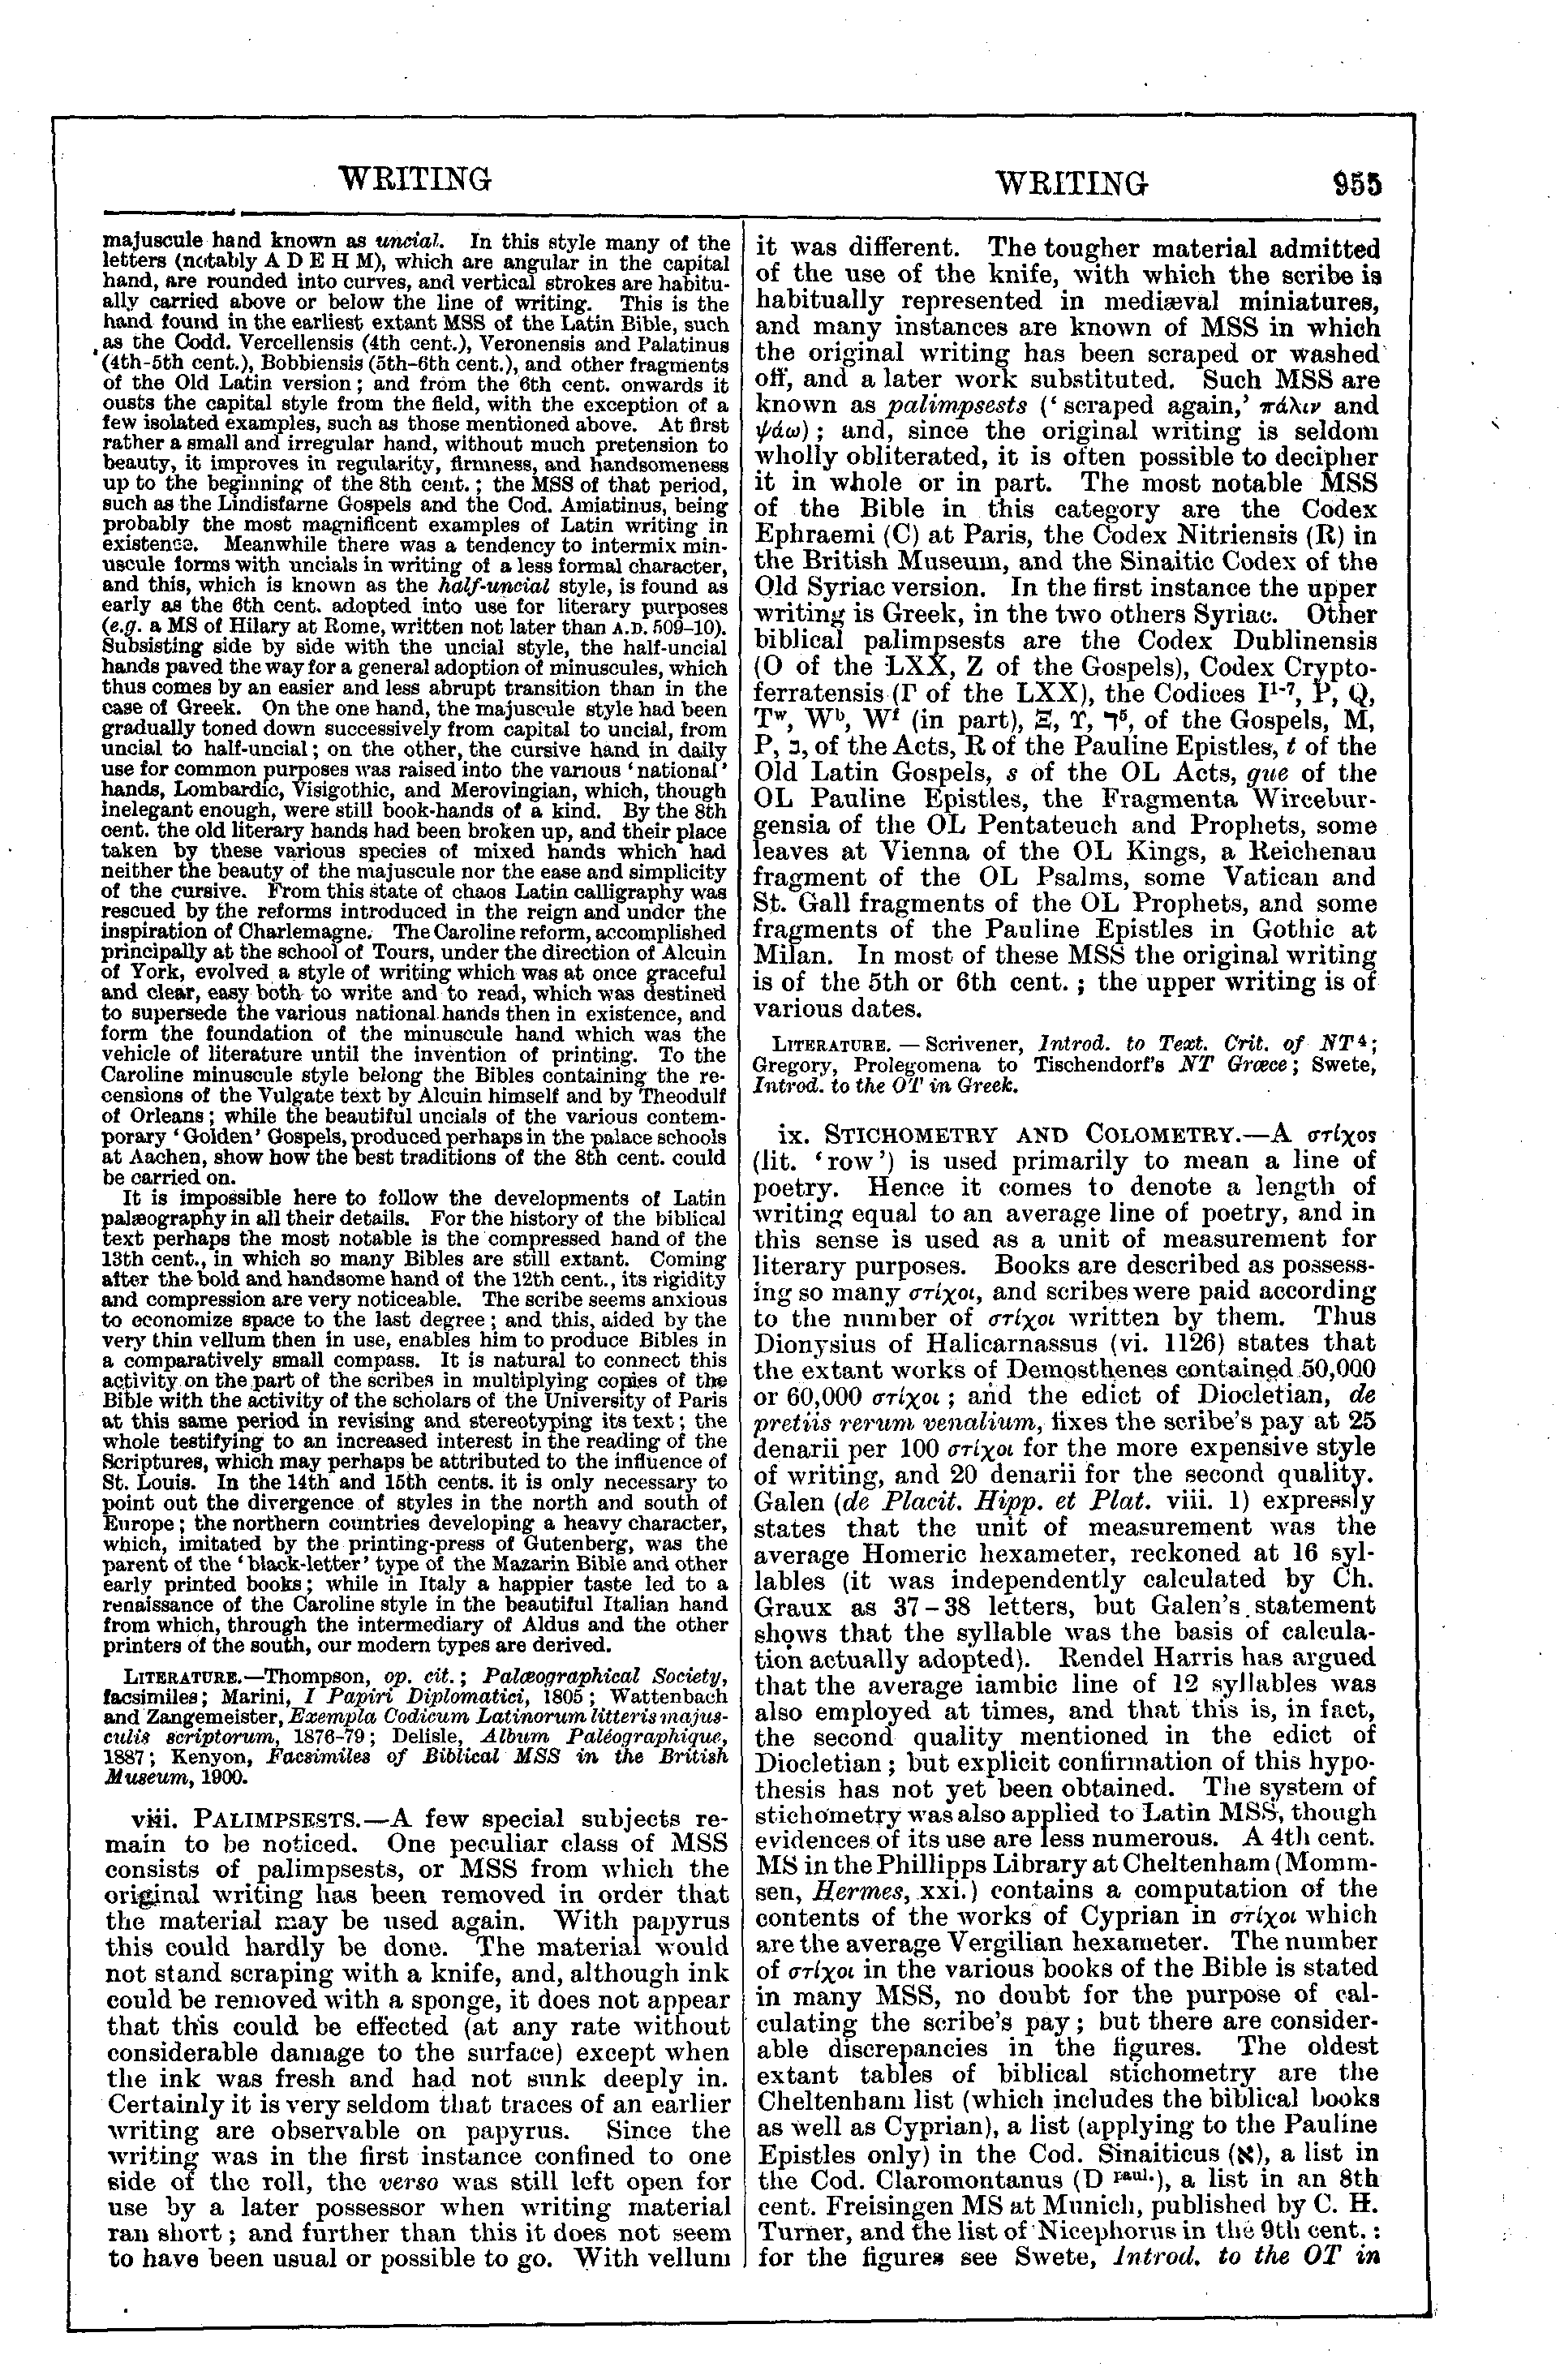 Image of page 955